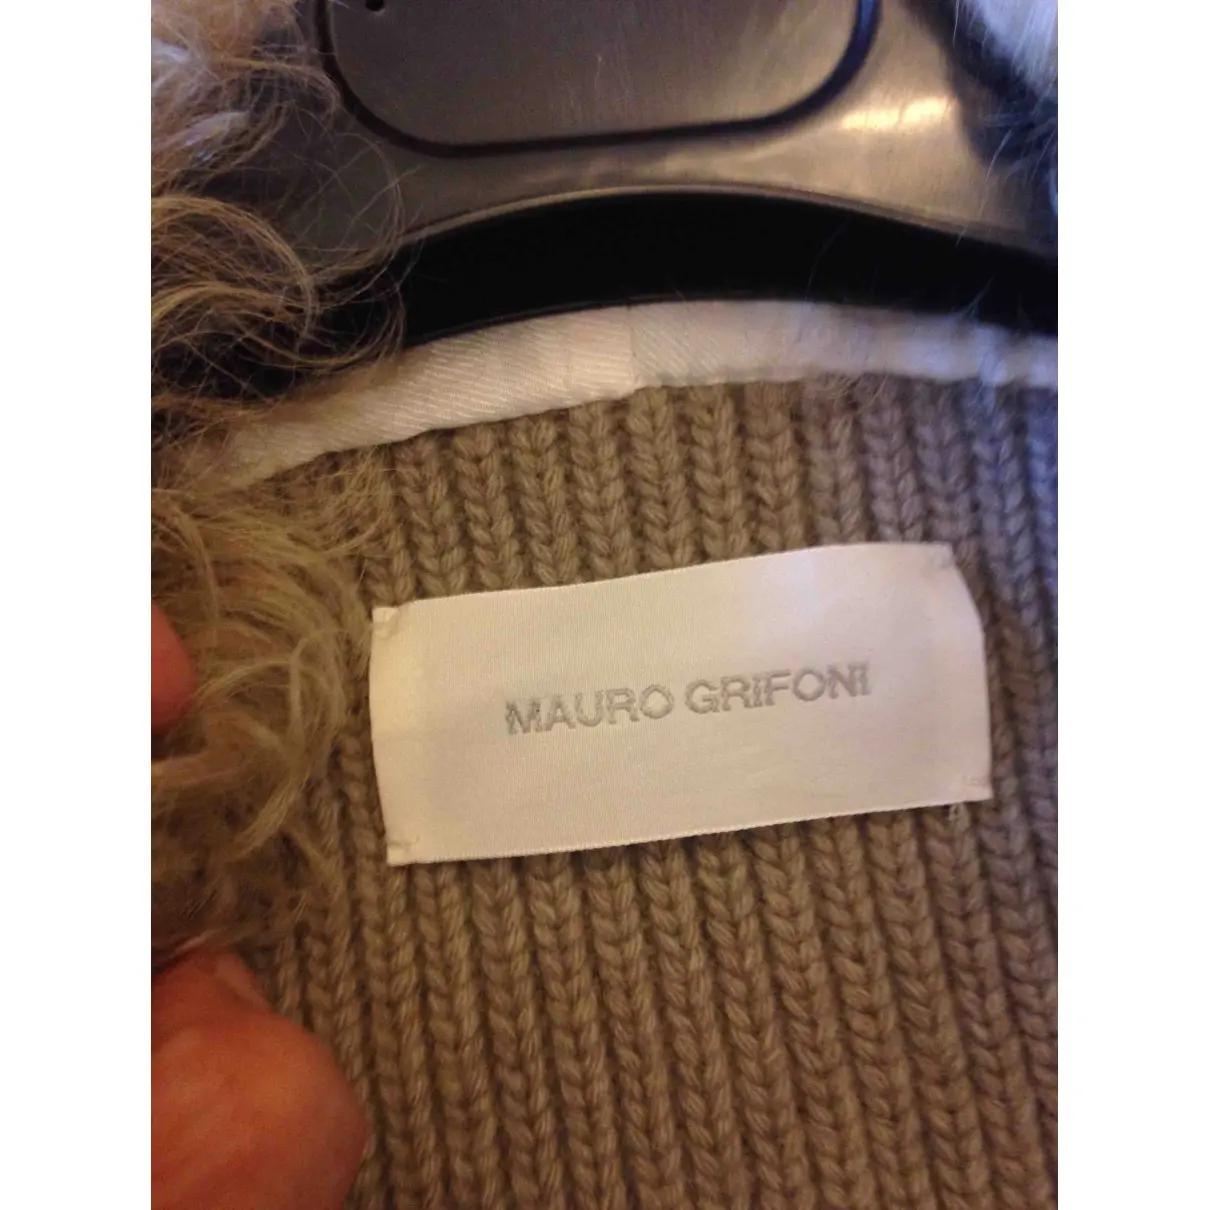 Buy Mauro Grifoni Shearling jacket online